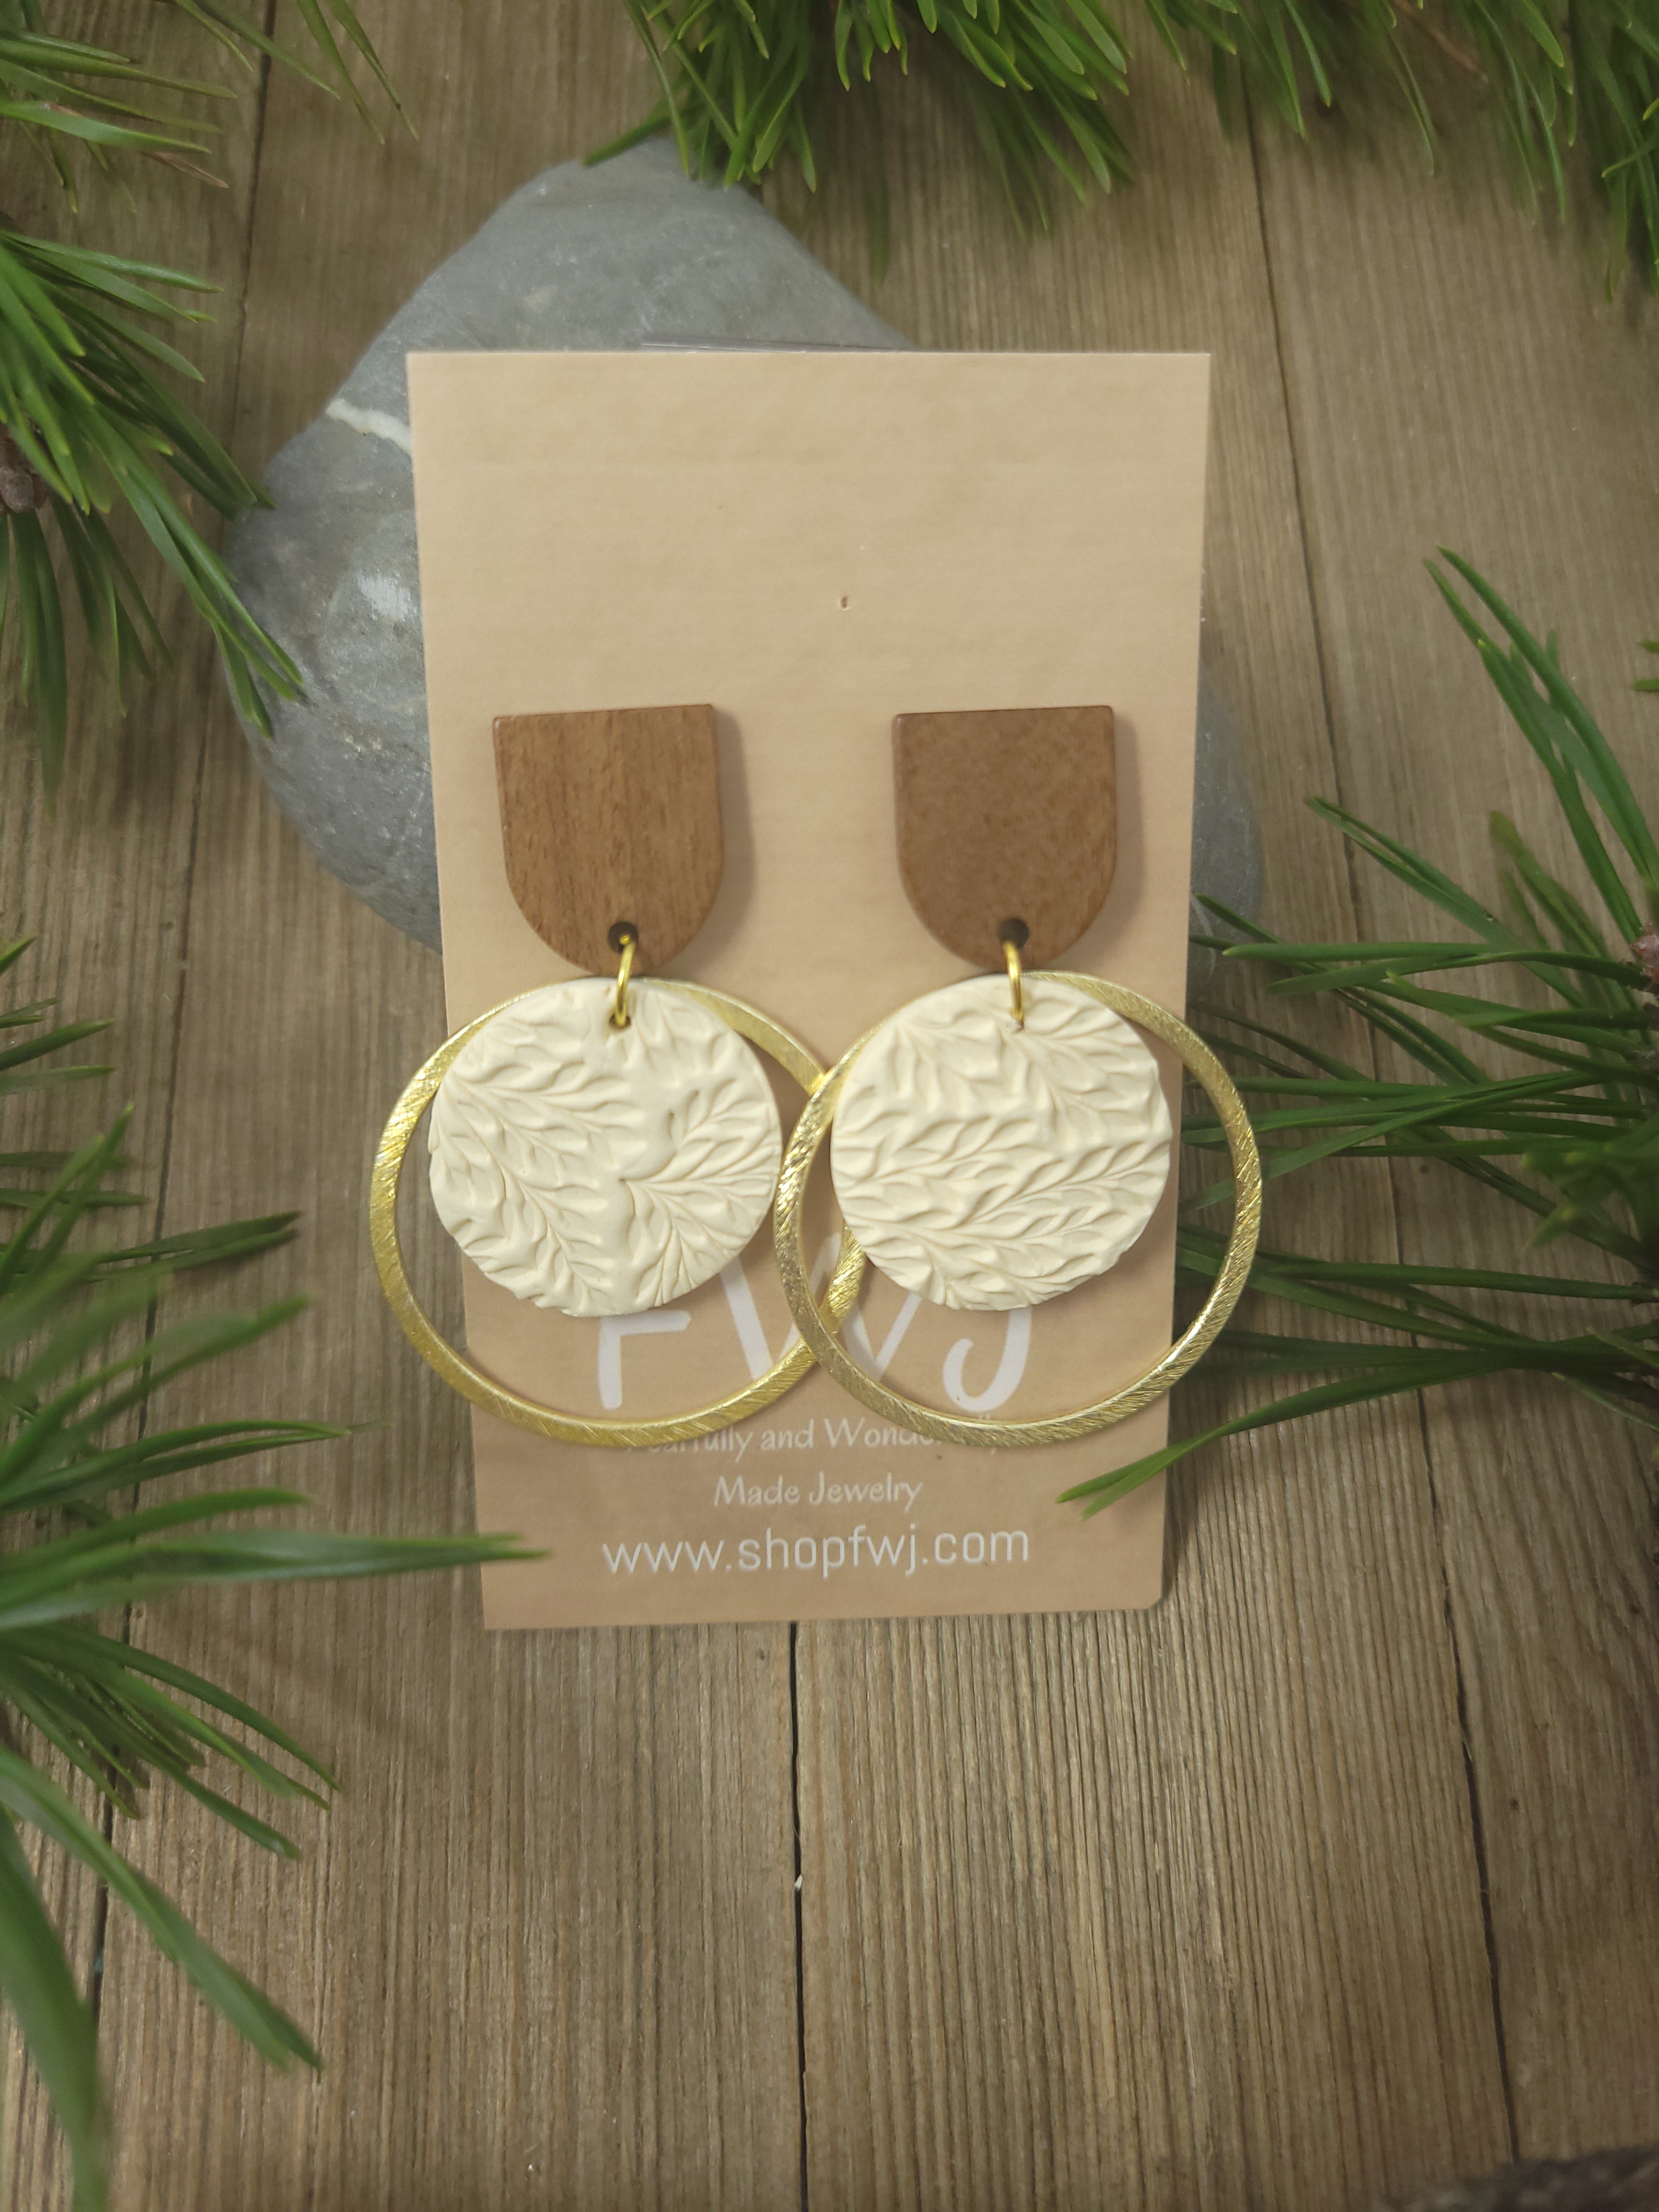 Cream colored clay and wood earrings